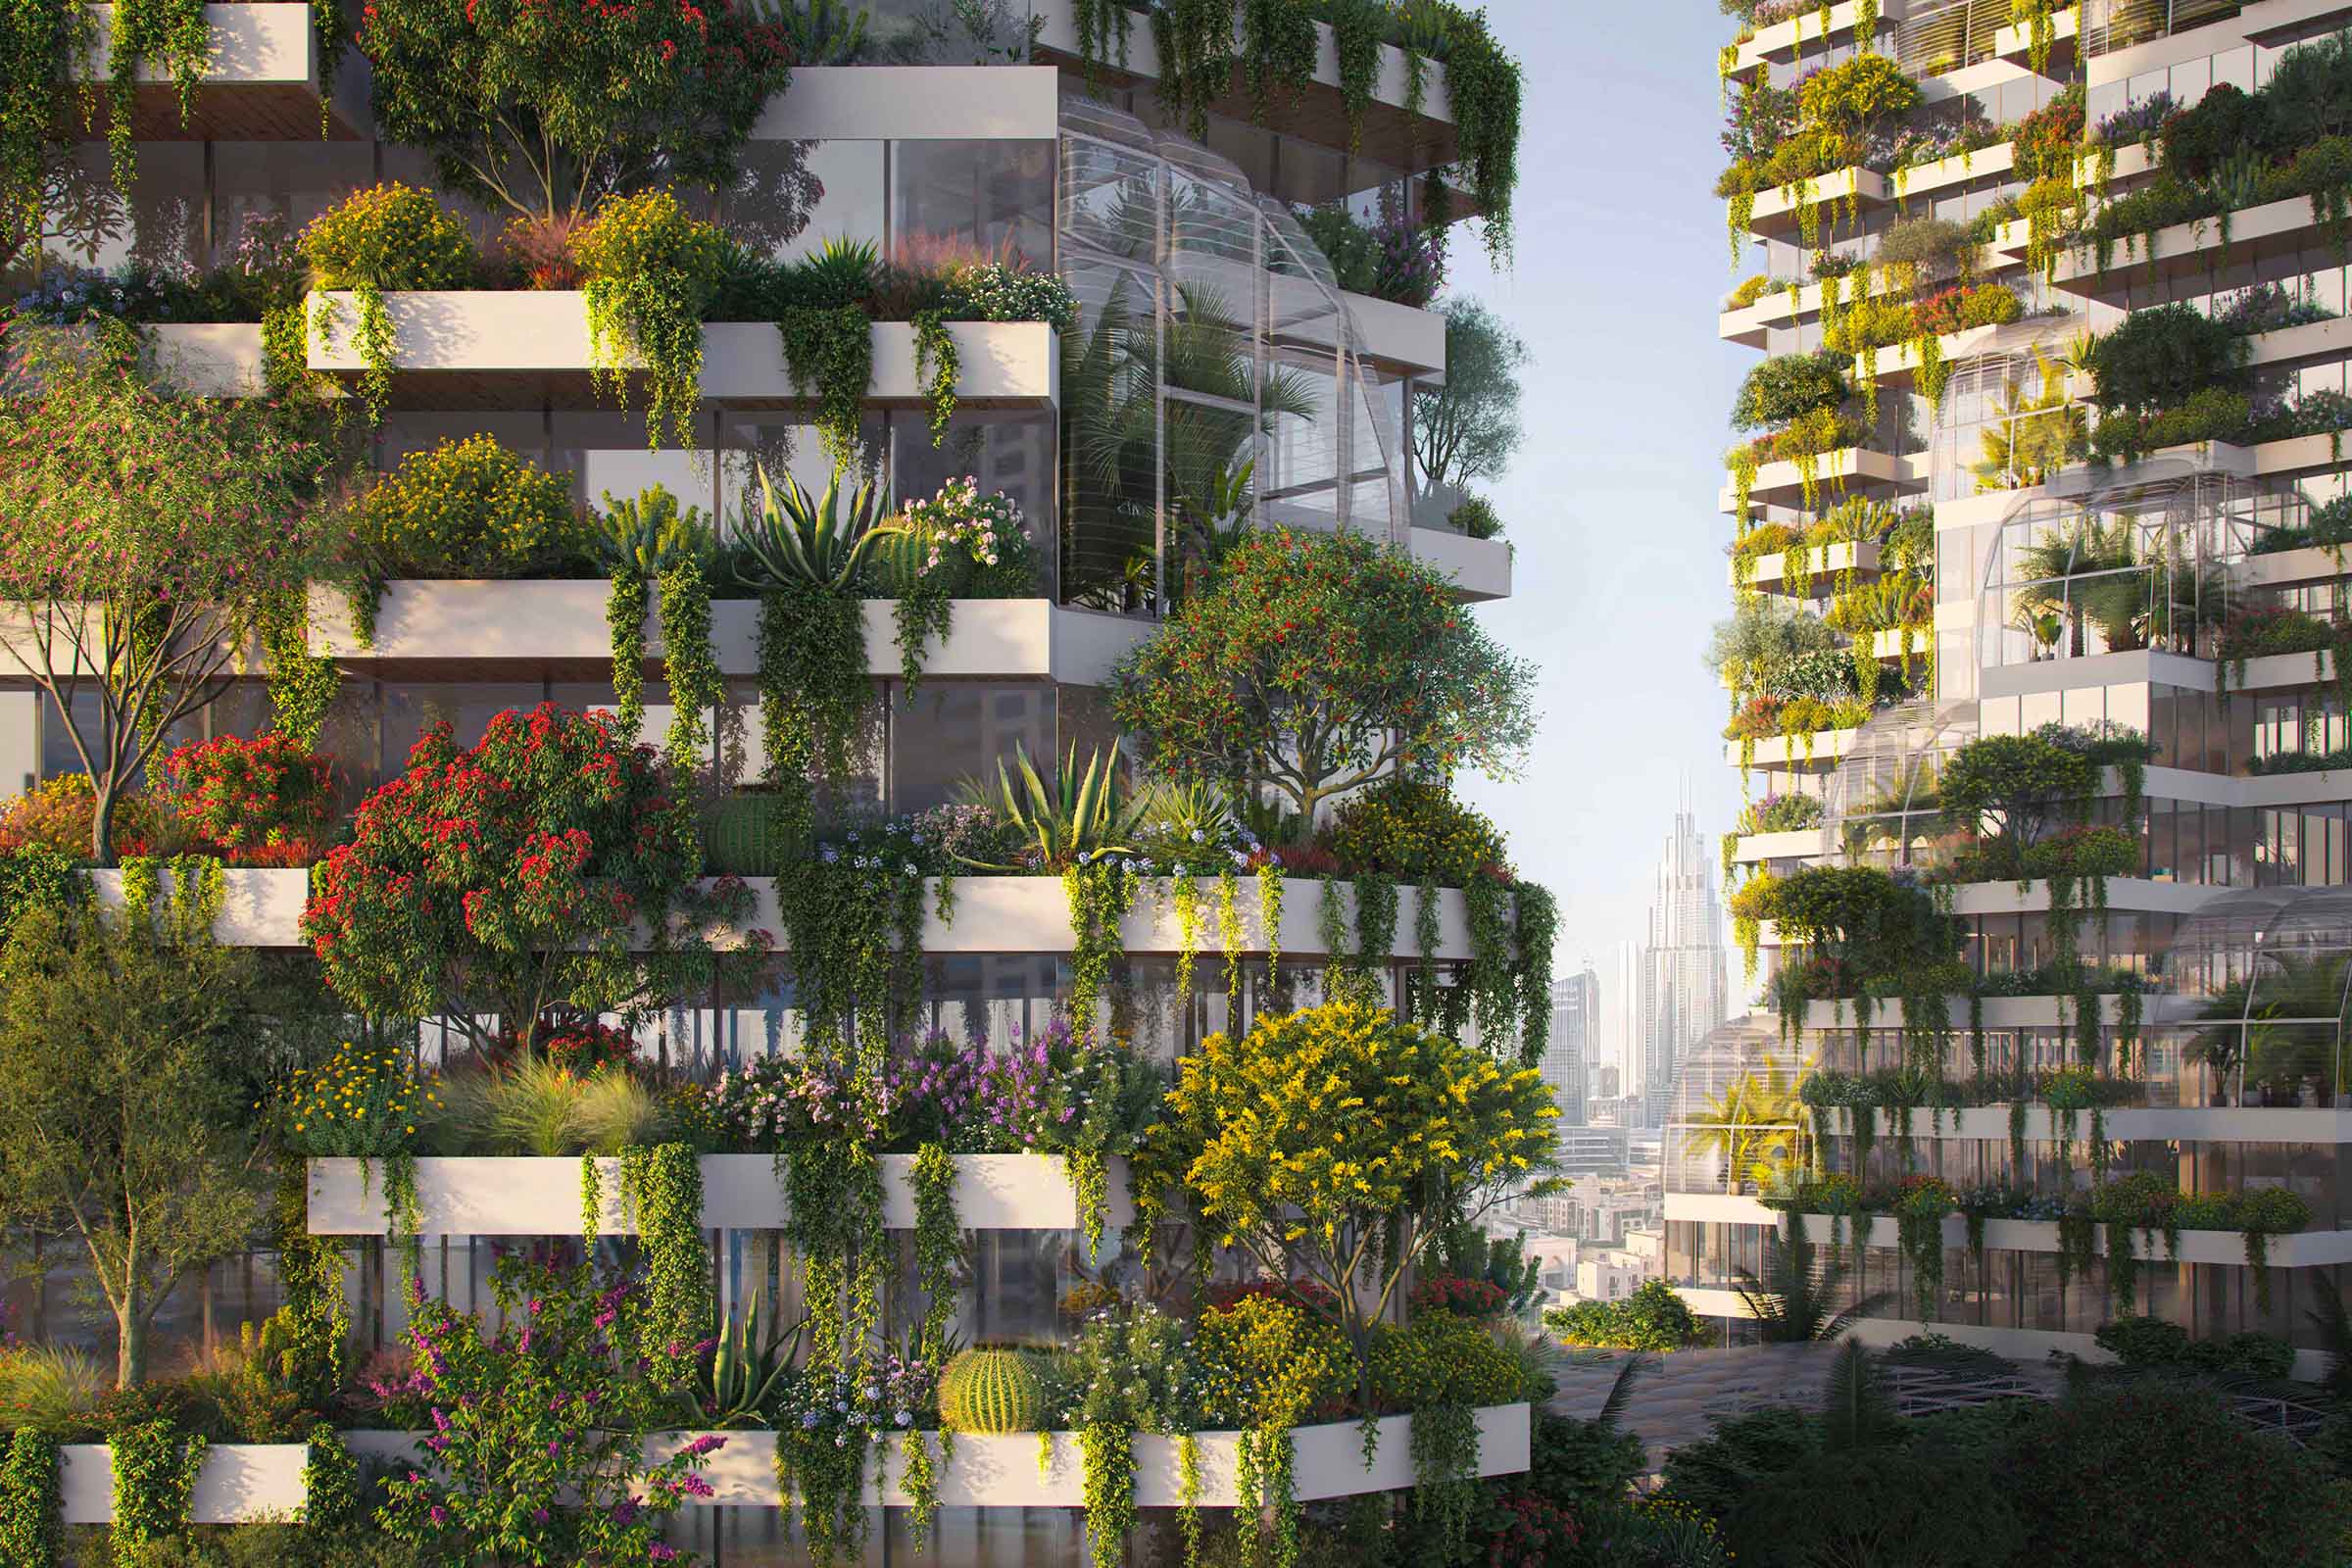 architect-firm-stefano-boeri-reveals-vertical-forest-towers-thatll-be-built-in-dubai-featured